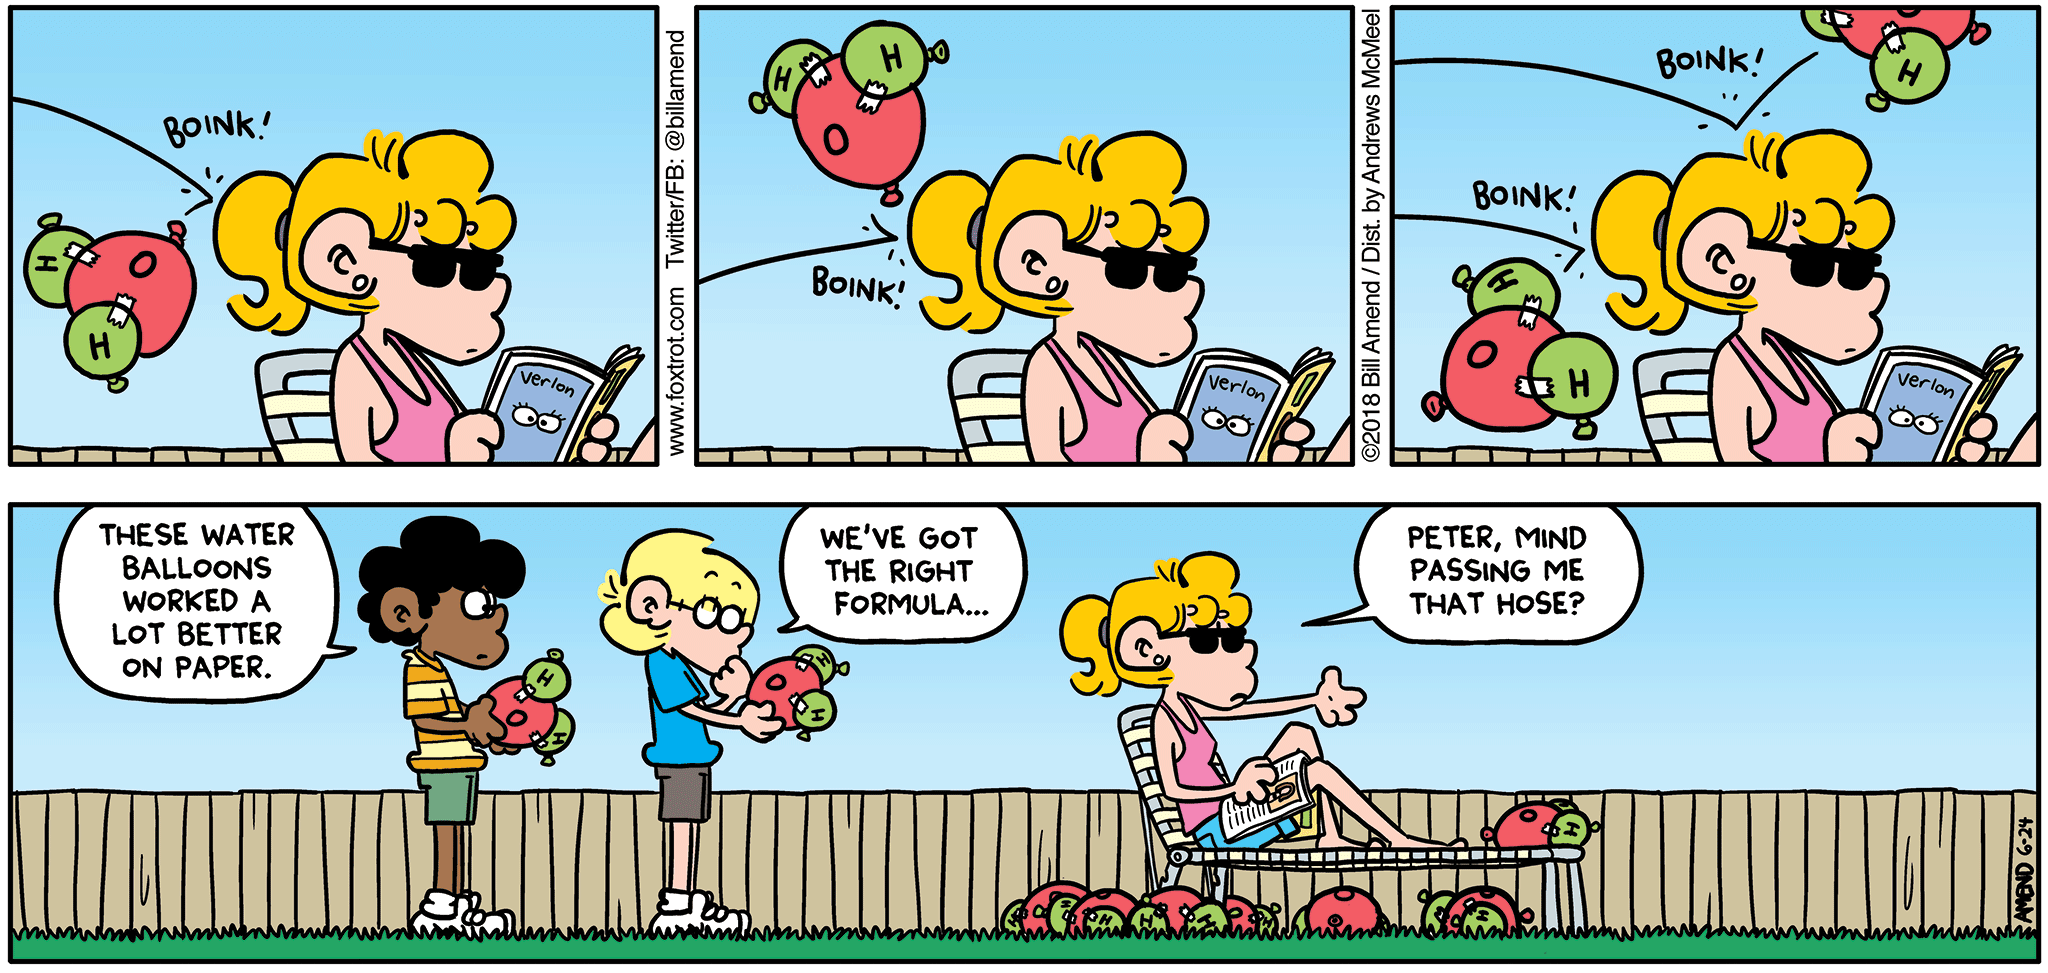 FoxTrot by Bill Amend - "Balloon Science" published June 24, 2018 - Marcus: These water balloons worked a lot better on paper. Jason Fox: We've got the right formula... Paige Fox: Peter, mind passing me that hose?